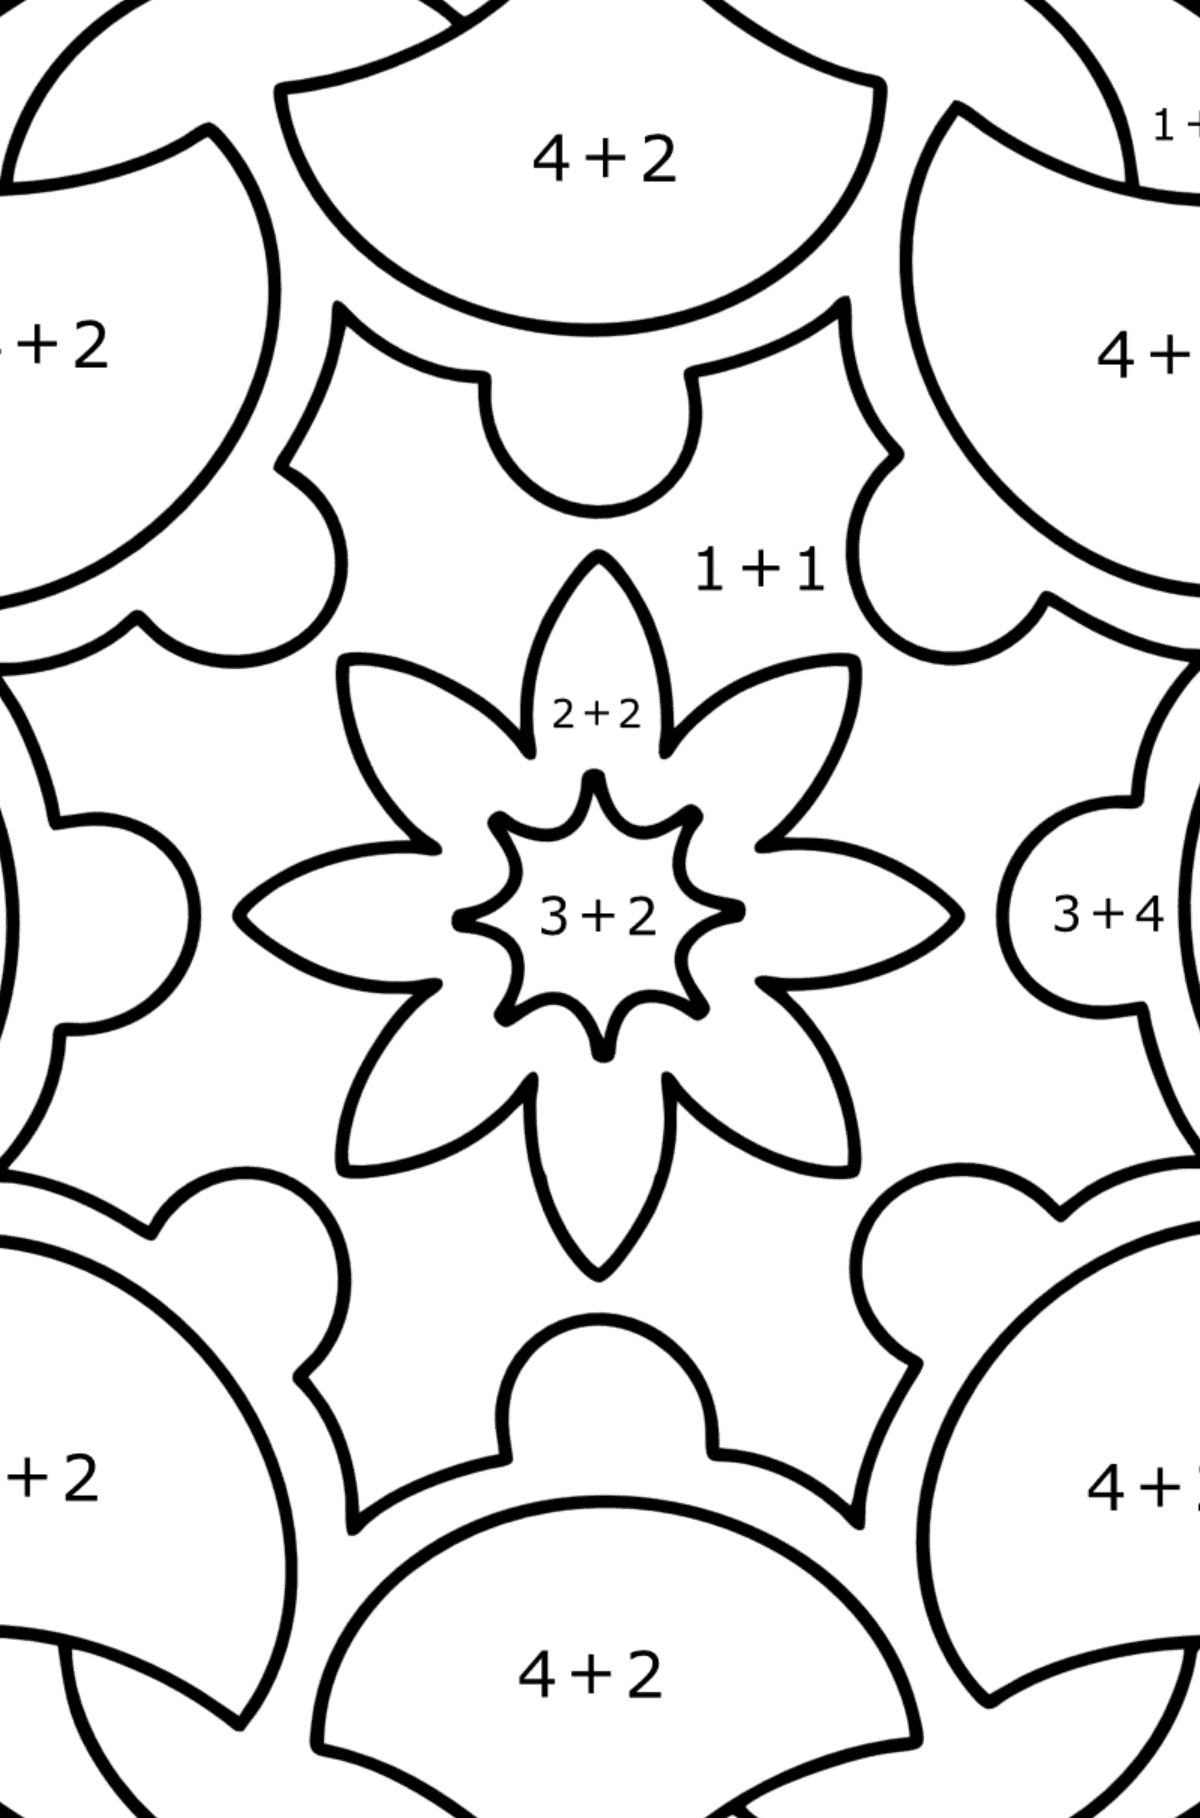 Mandala coloring page - 13 elements - Math Coloring - Addition for Kids